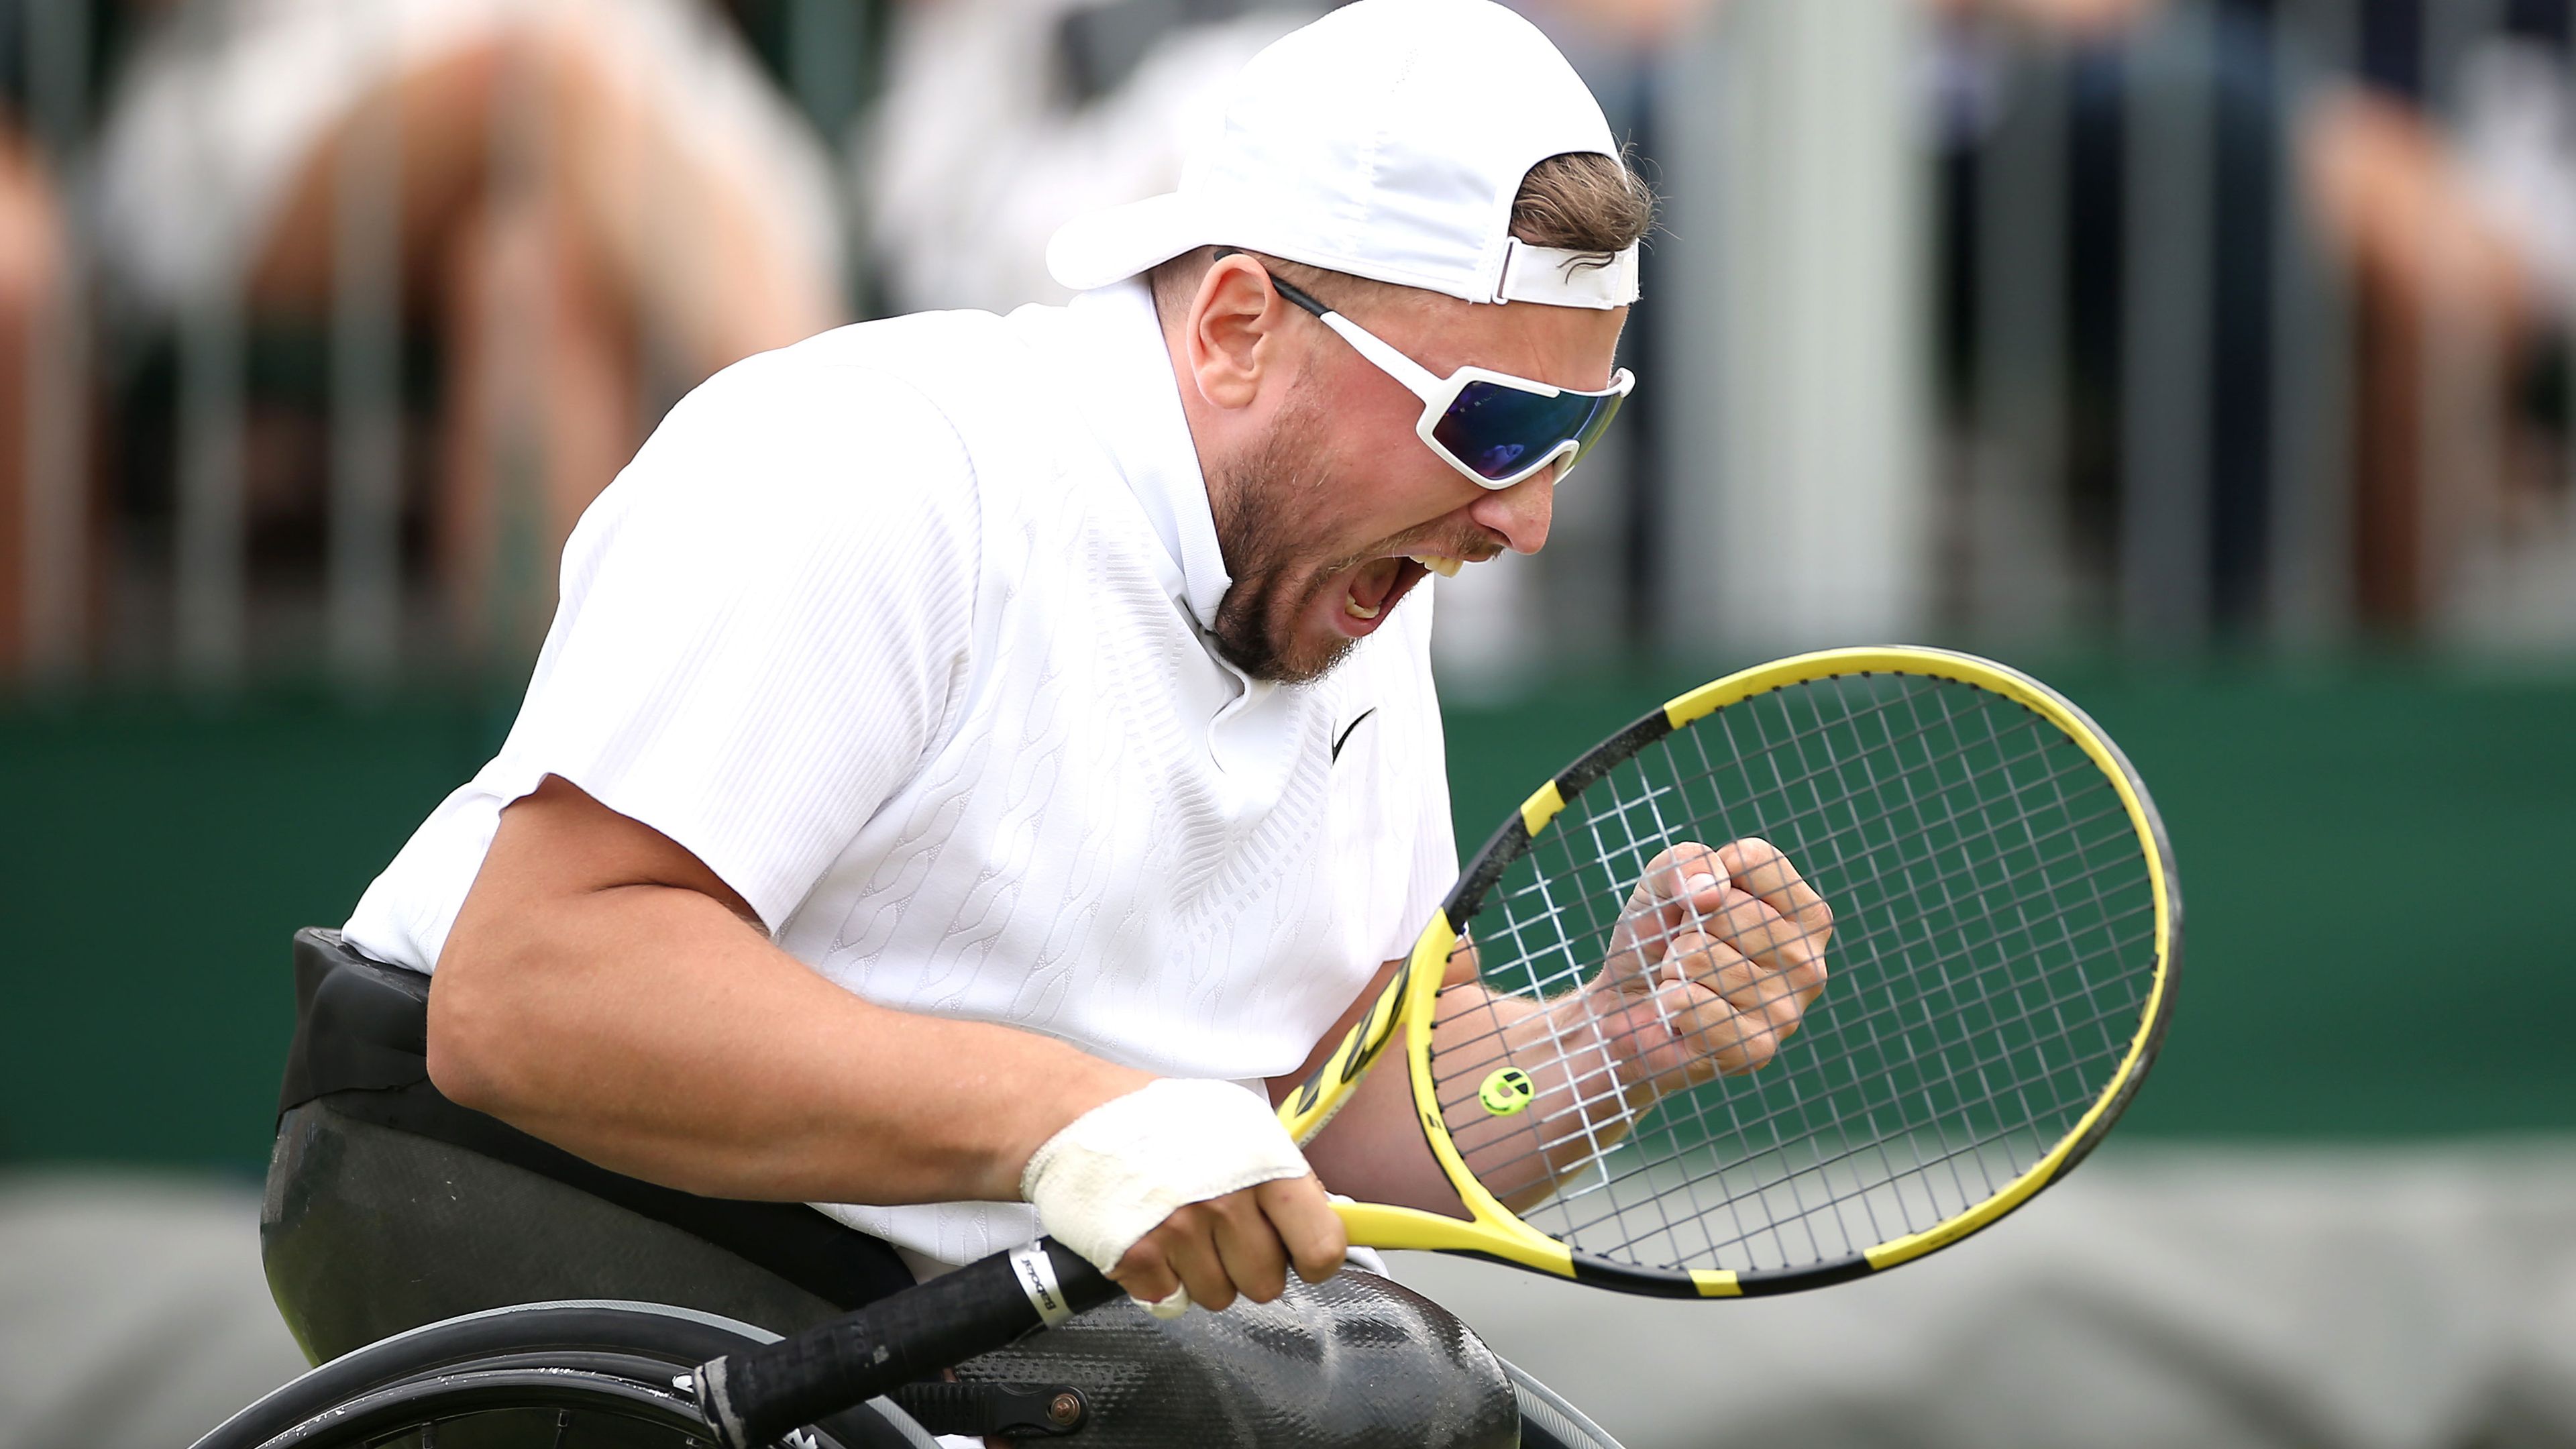 Dylan Alcott blown away by potential to match Rod Laver at US Open